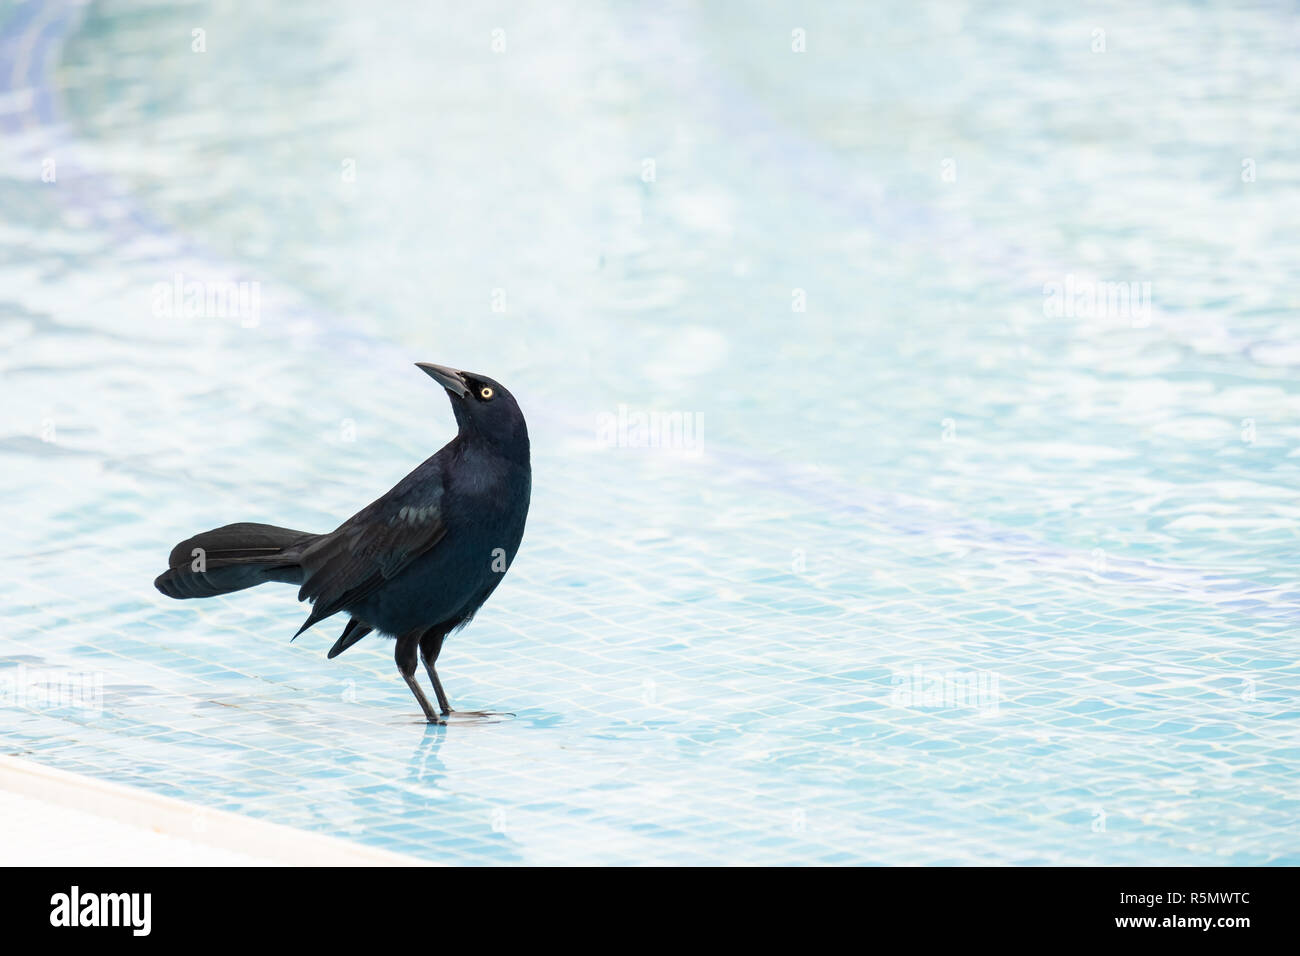 A Greater Antillean Grackle , Quiscalus niger, bathes in a pool near Jibacoa Cuba. Stock Photo